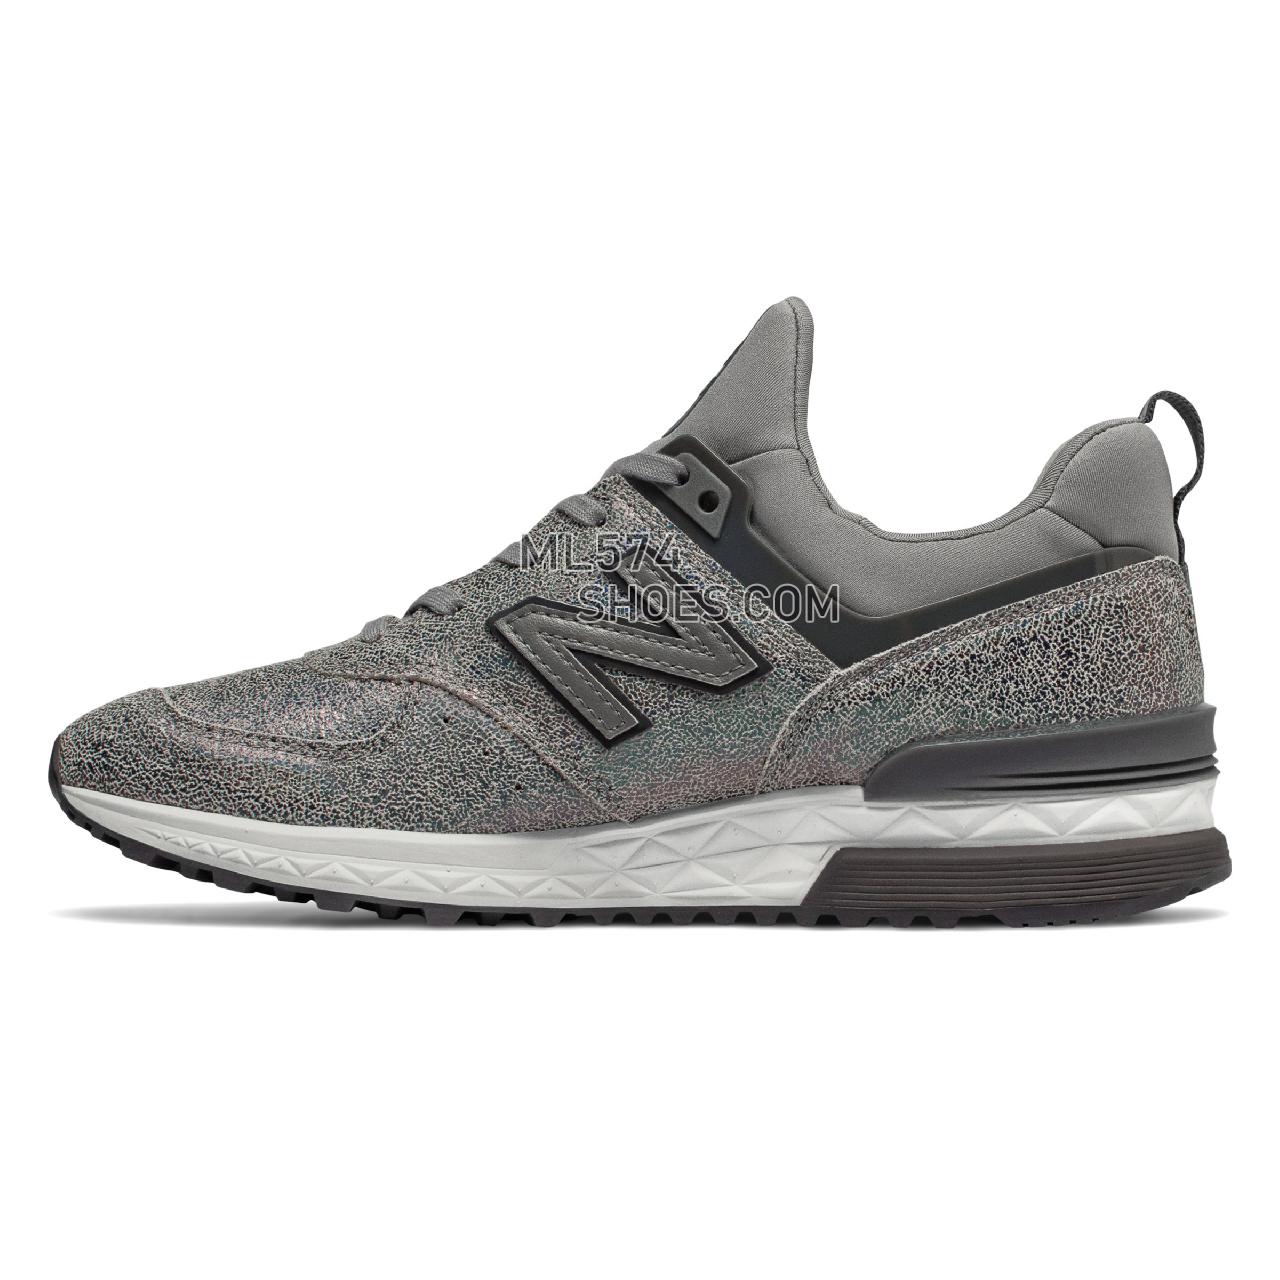 New Balance 574 Sport - Women's 574 - Classic Marblehead with Magnet - WS574TRB